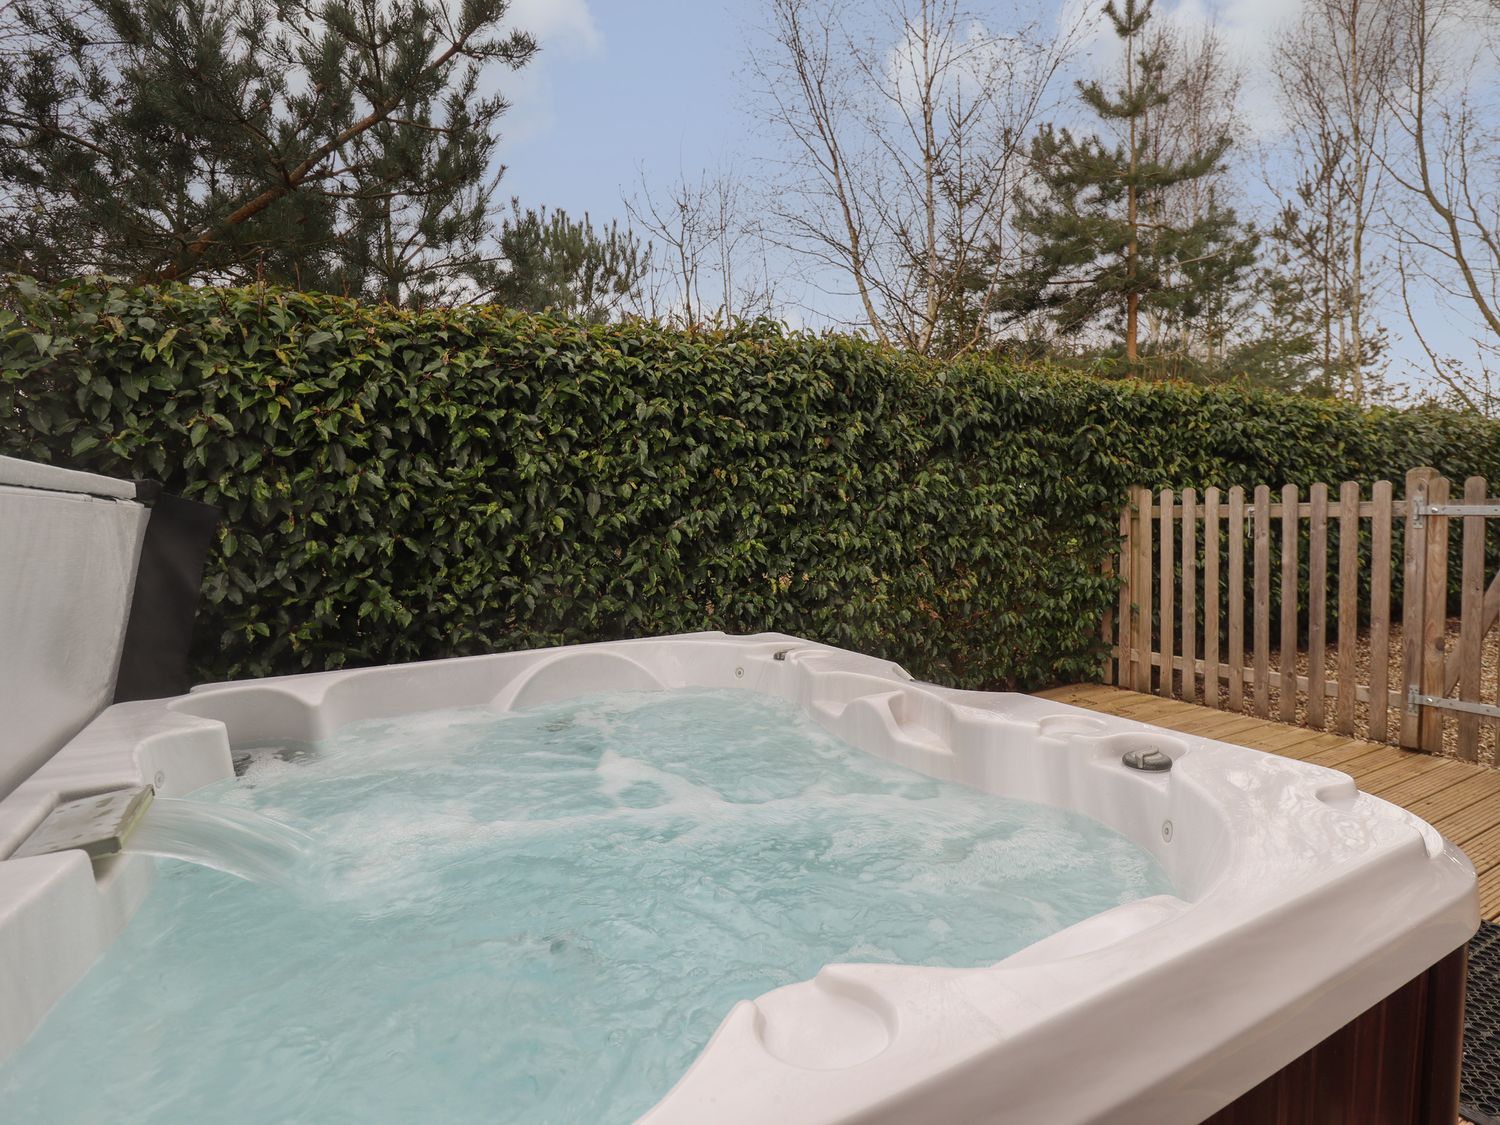 Swan Lodge in Stainfield, Bardney, Lincolnshire, sleeps two guests in one bedroom. One dog, hot tub.